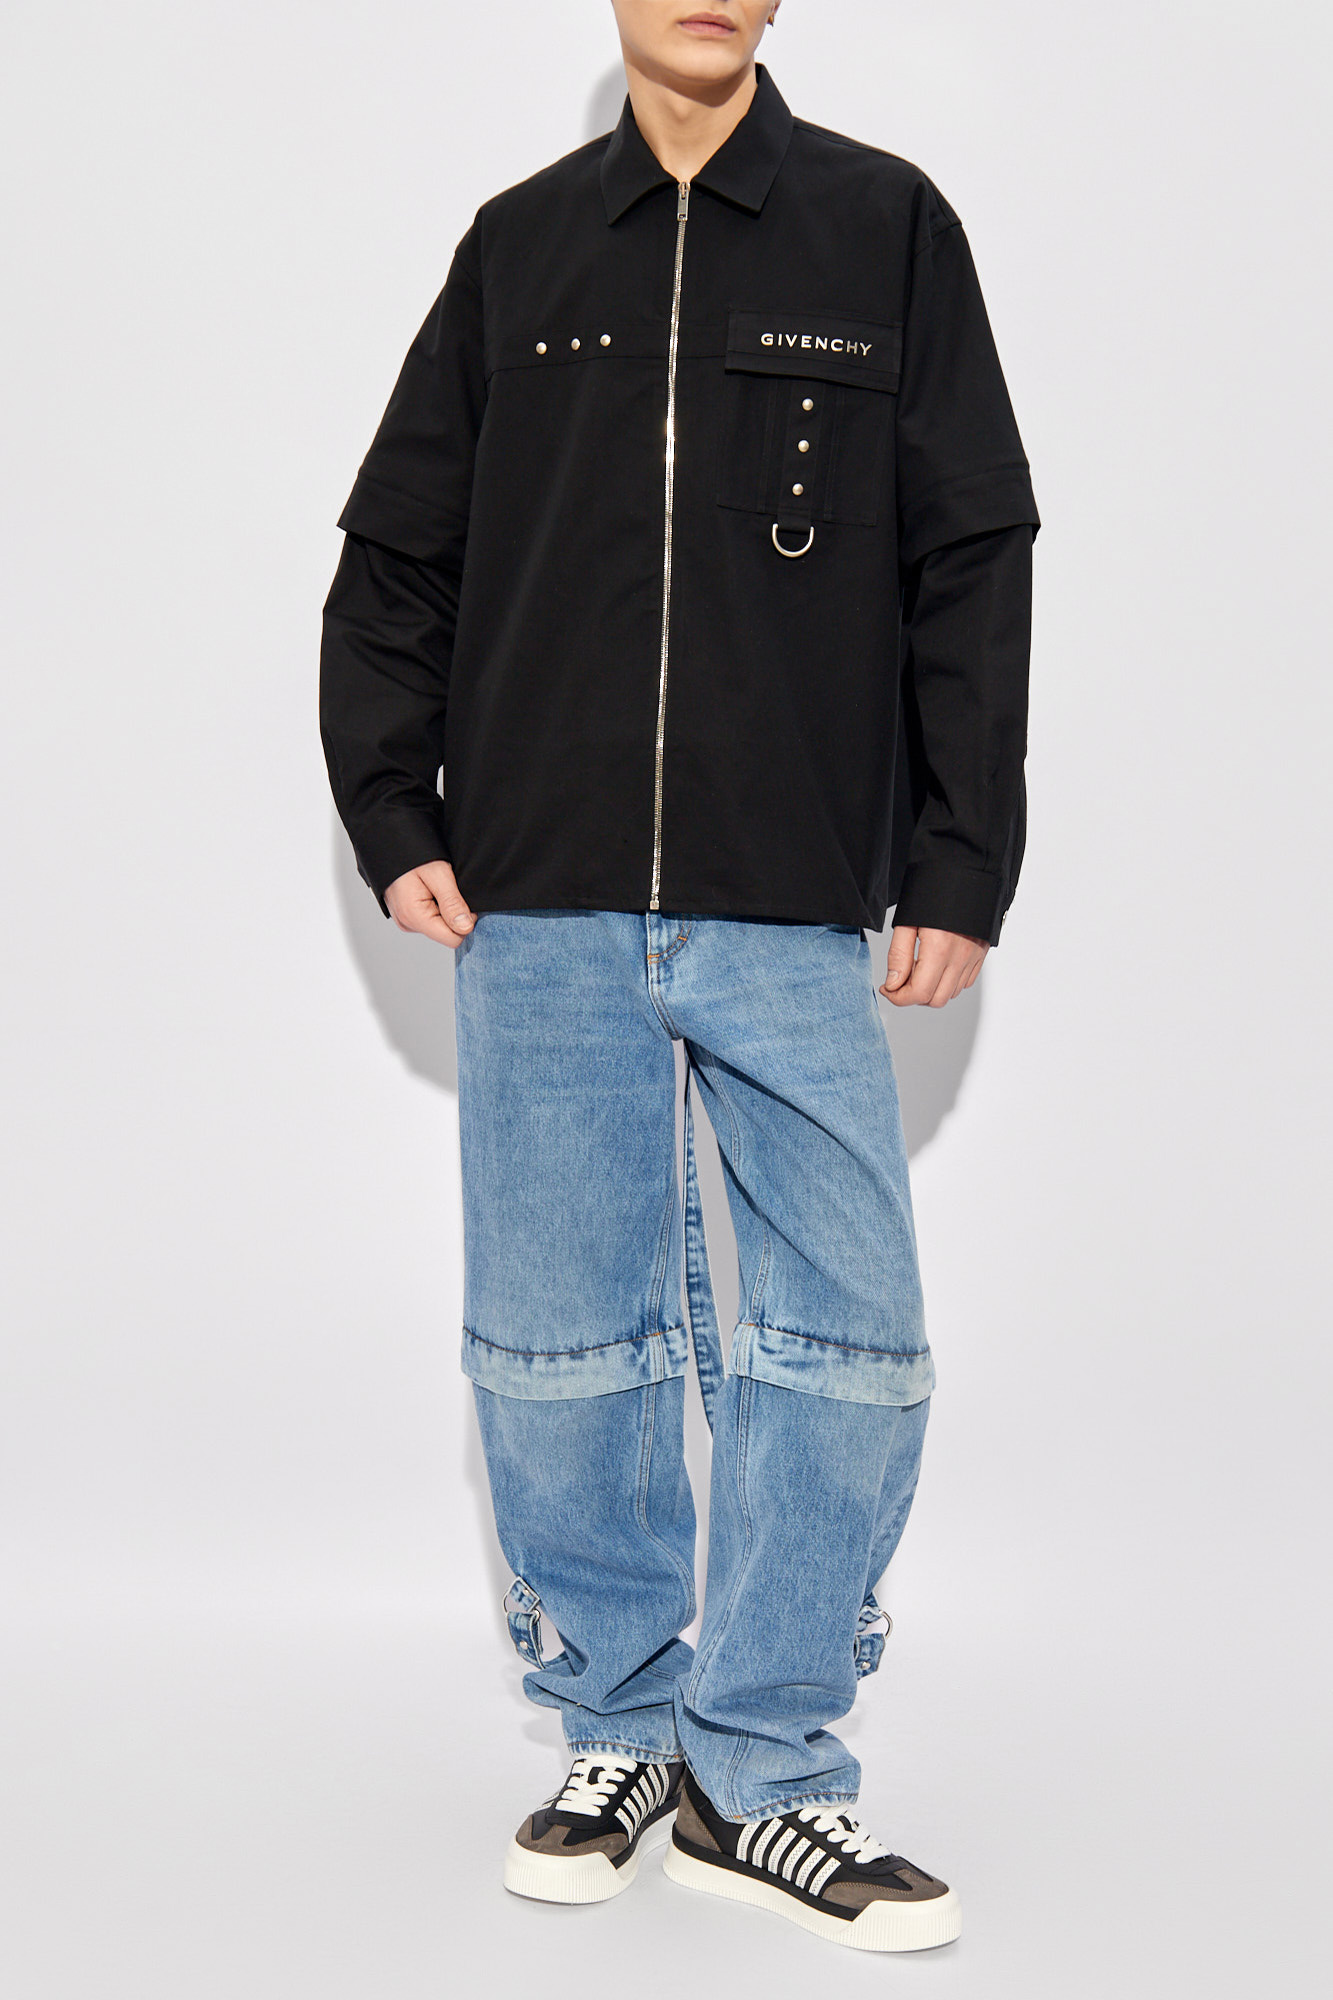 Givenchy Loose-fitting jeans